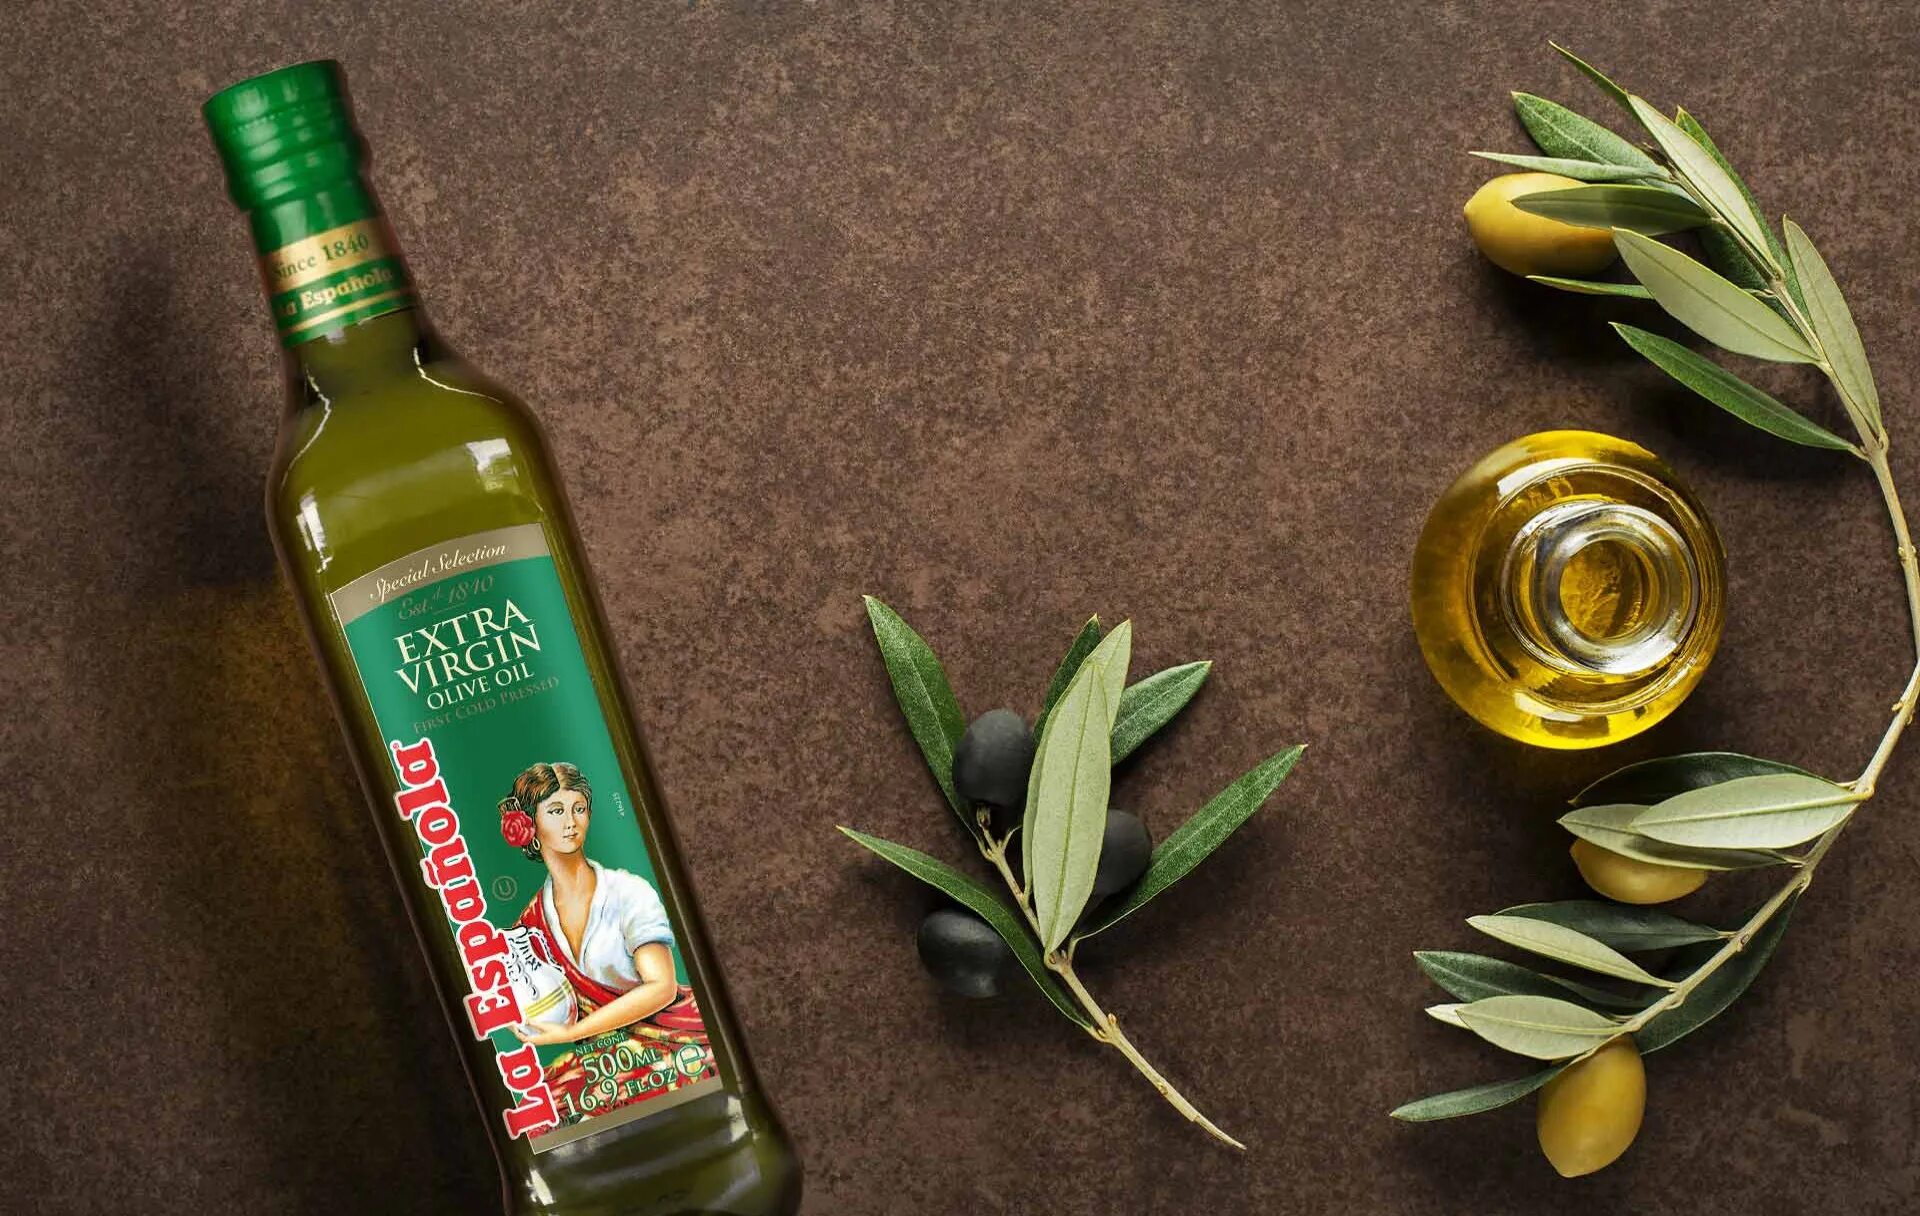 Olive Oil масло оливковое. San Michele Olive Oil. Олив Ойл масло оливковое. Оливки и оливковое масло. Зачем оливковое масло